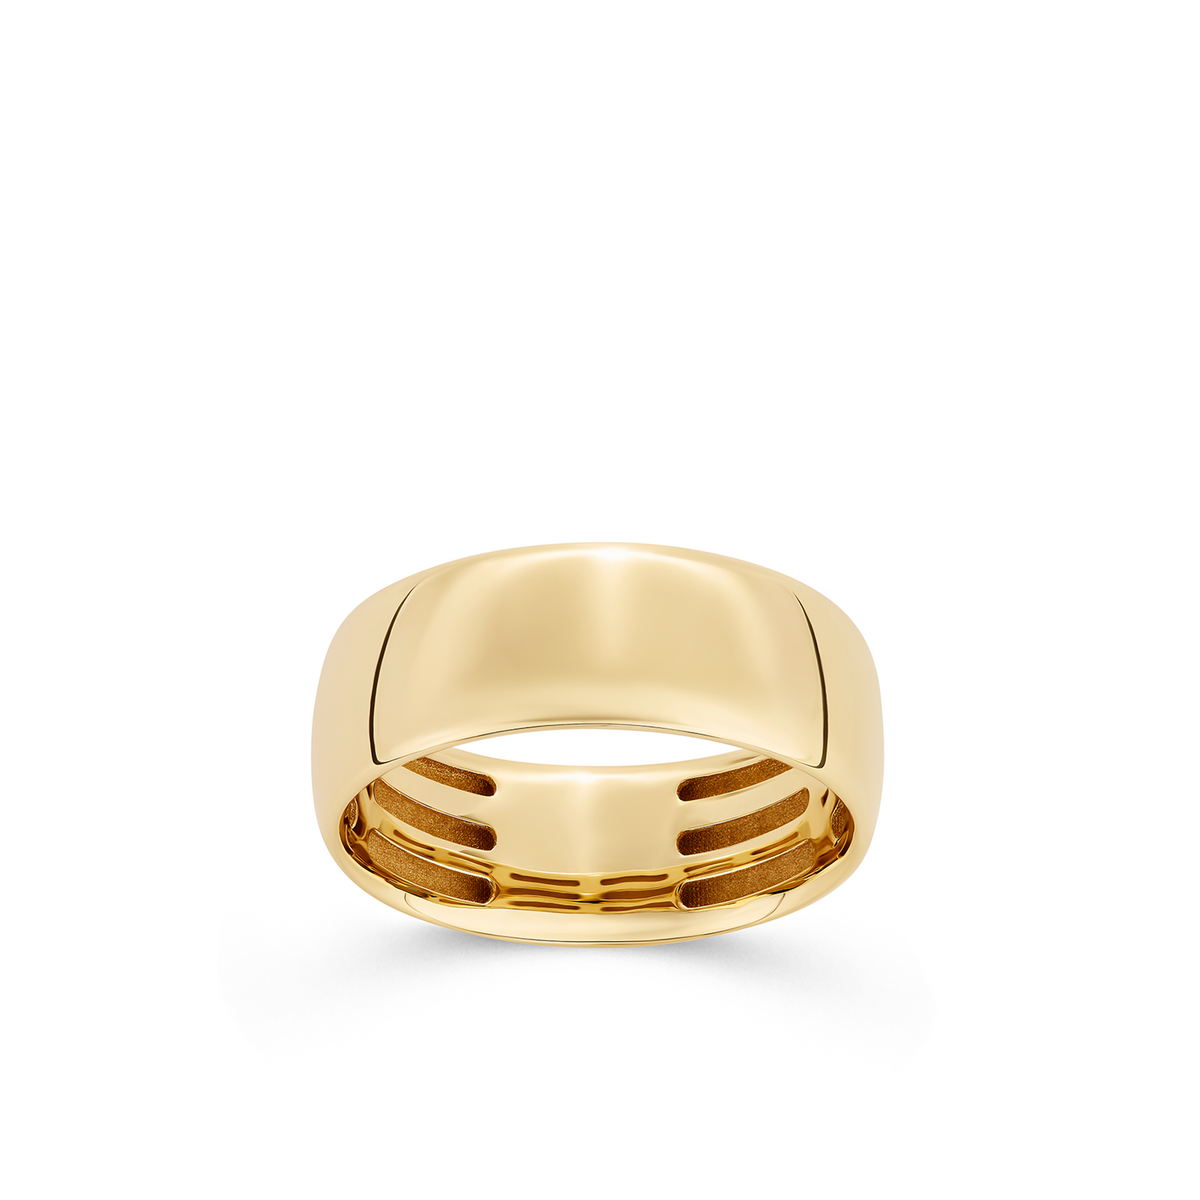 Barrel Dress Ring in 9ct Yellow Gold